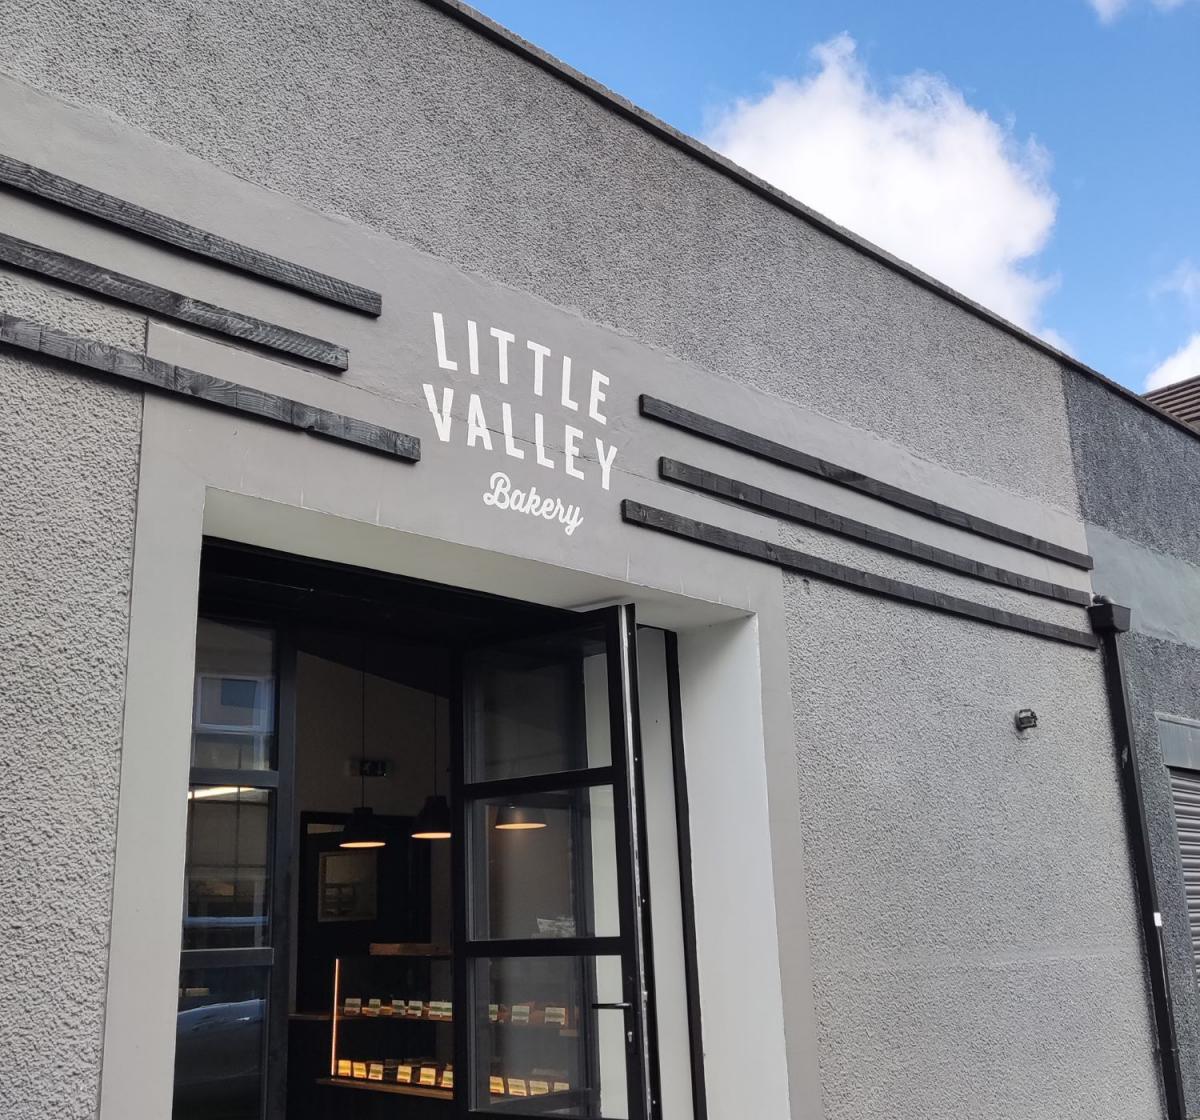 Images from Little Valley Bakery